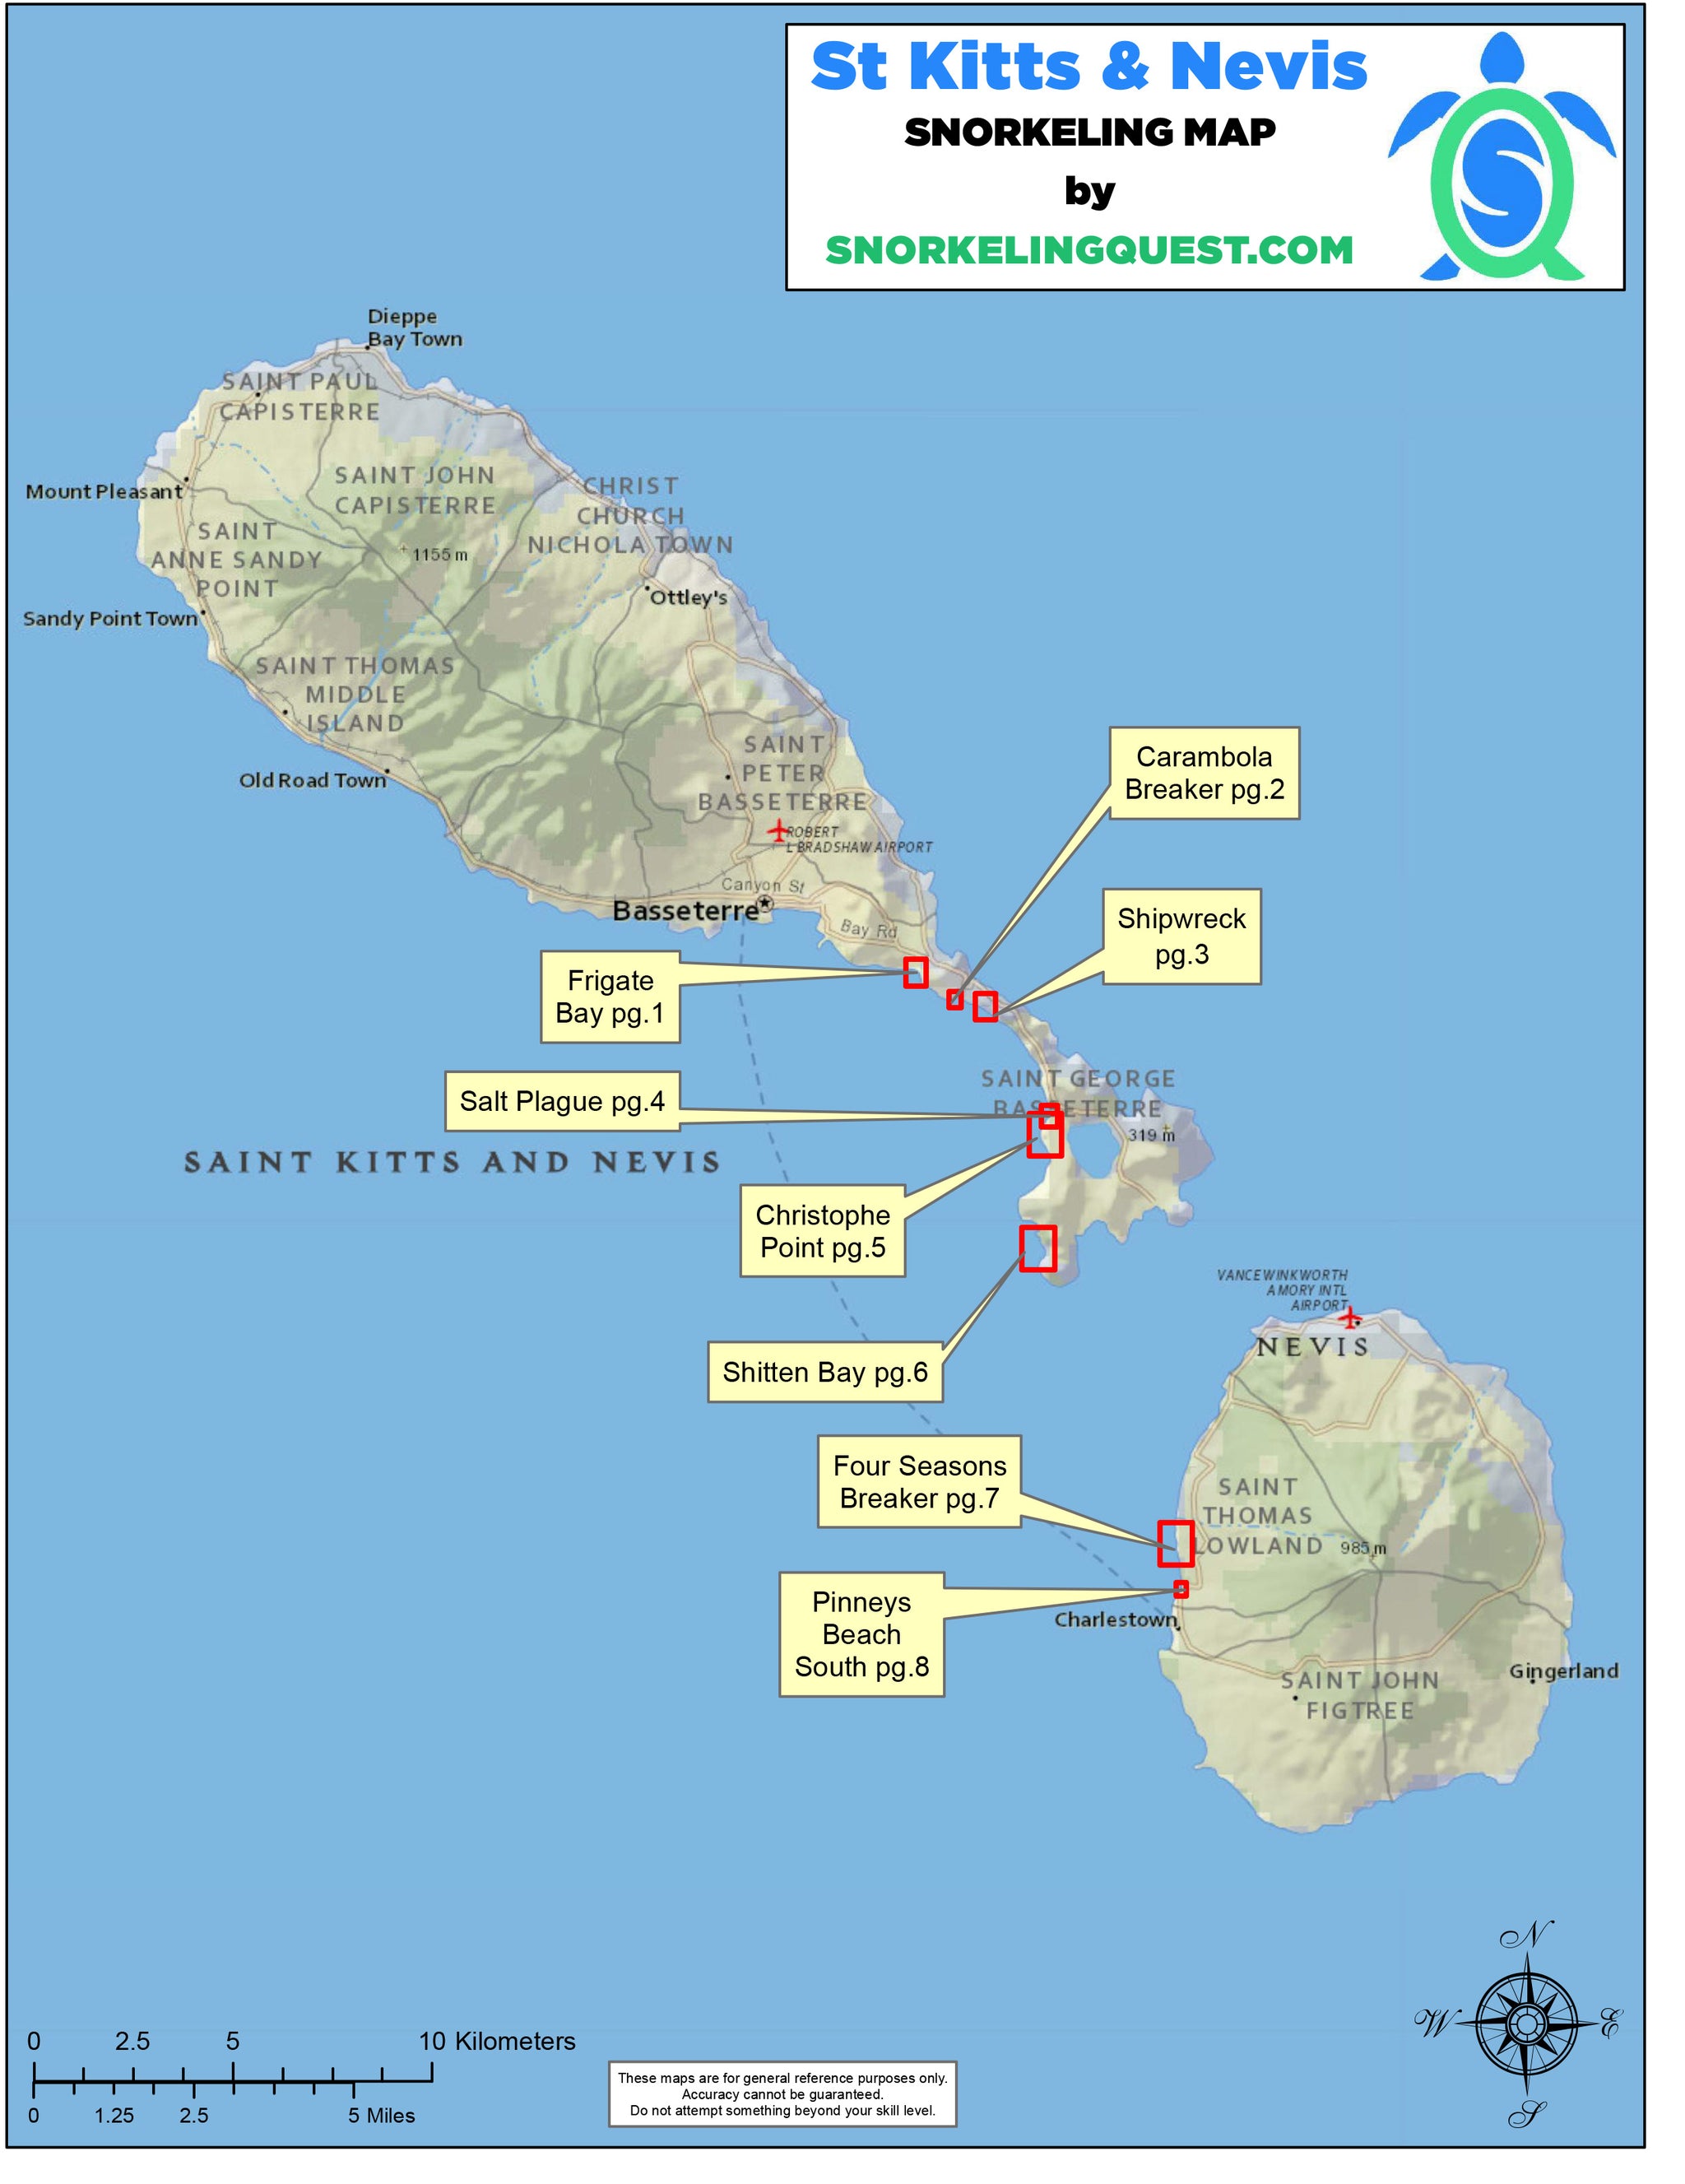 St Kitts and Nevis Snorkeling Map